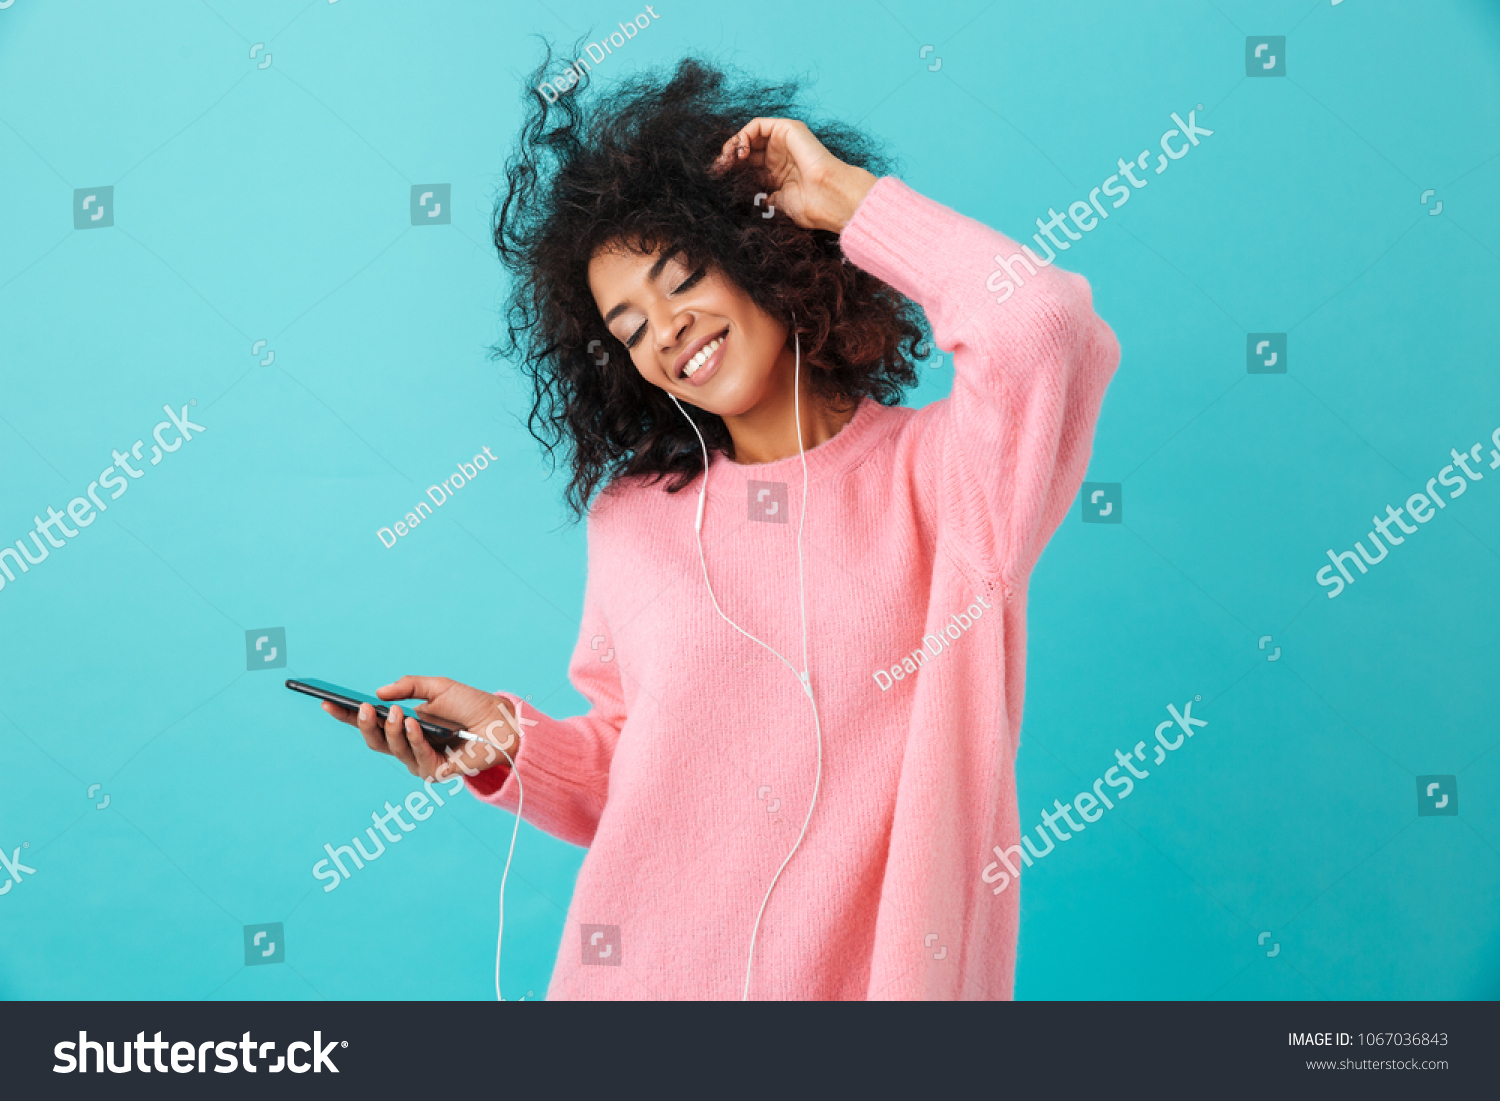 Joyous american woman in casual clothing dancing and listening to music with pleasure via white earphones isolated over blue background #1067036843